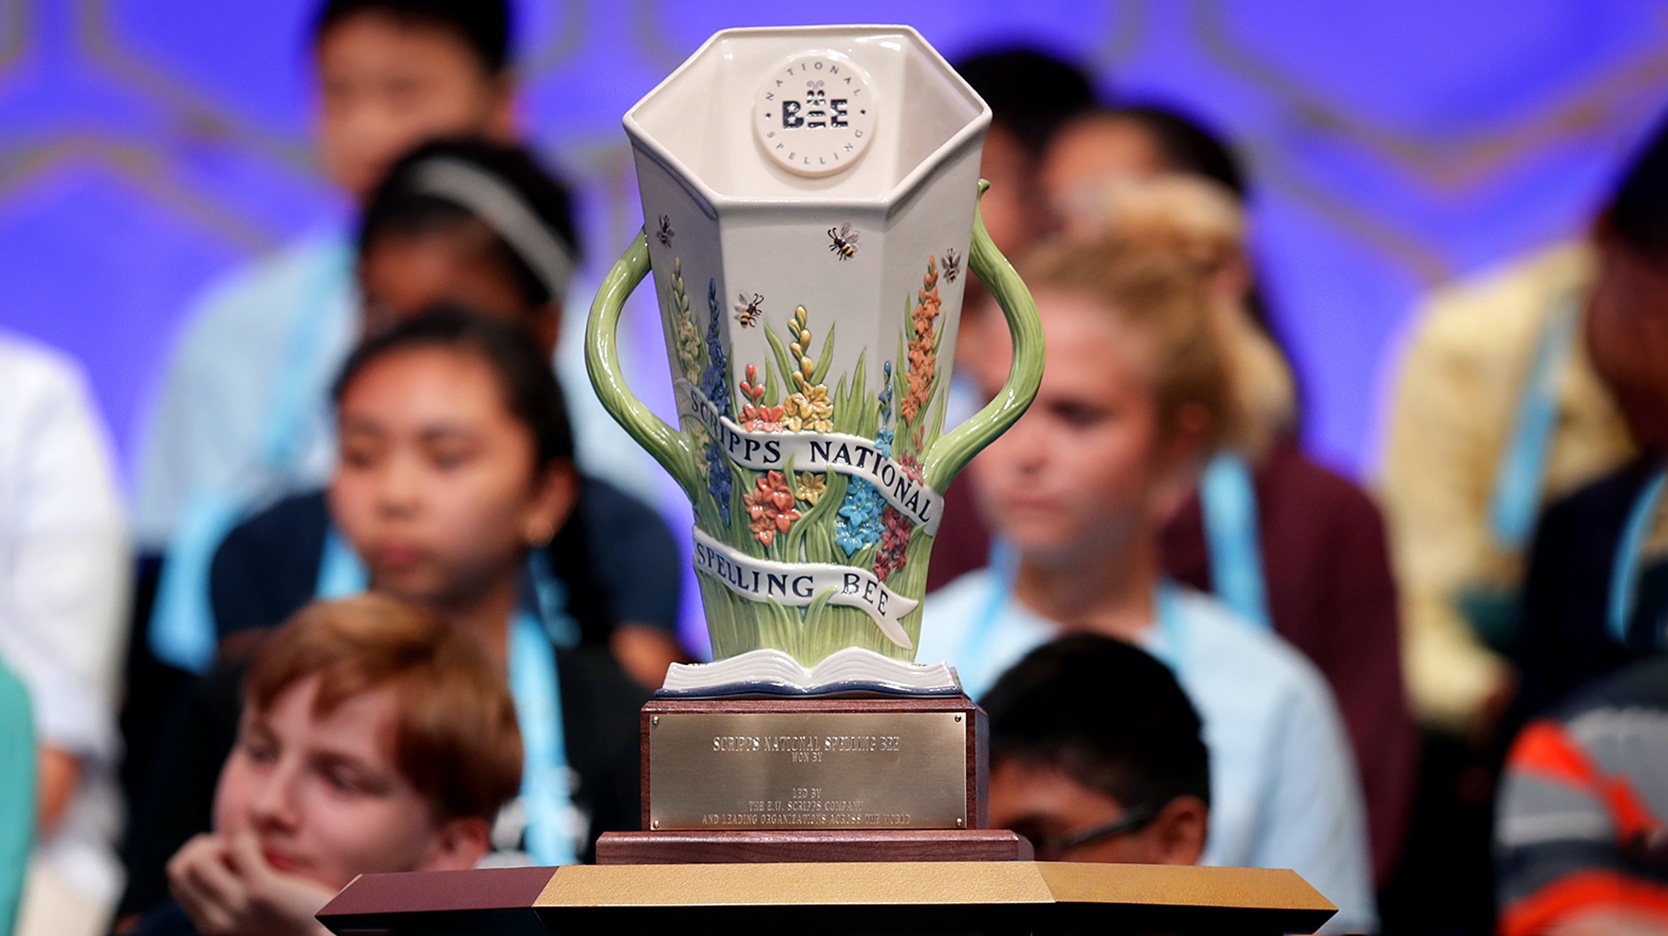 championship trophy for the Scripps National Spelling Bee 2019